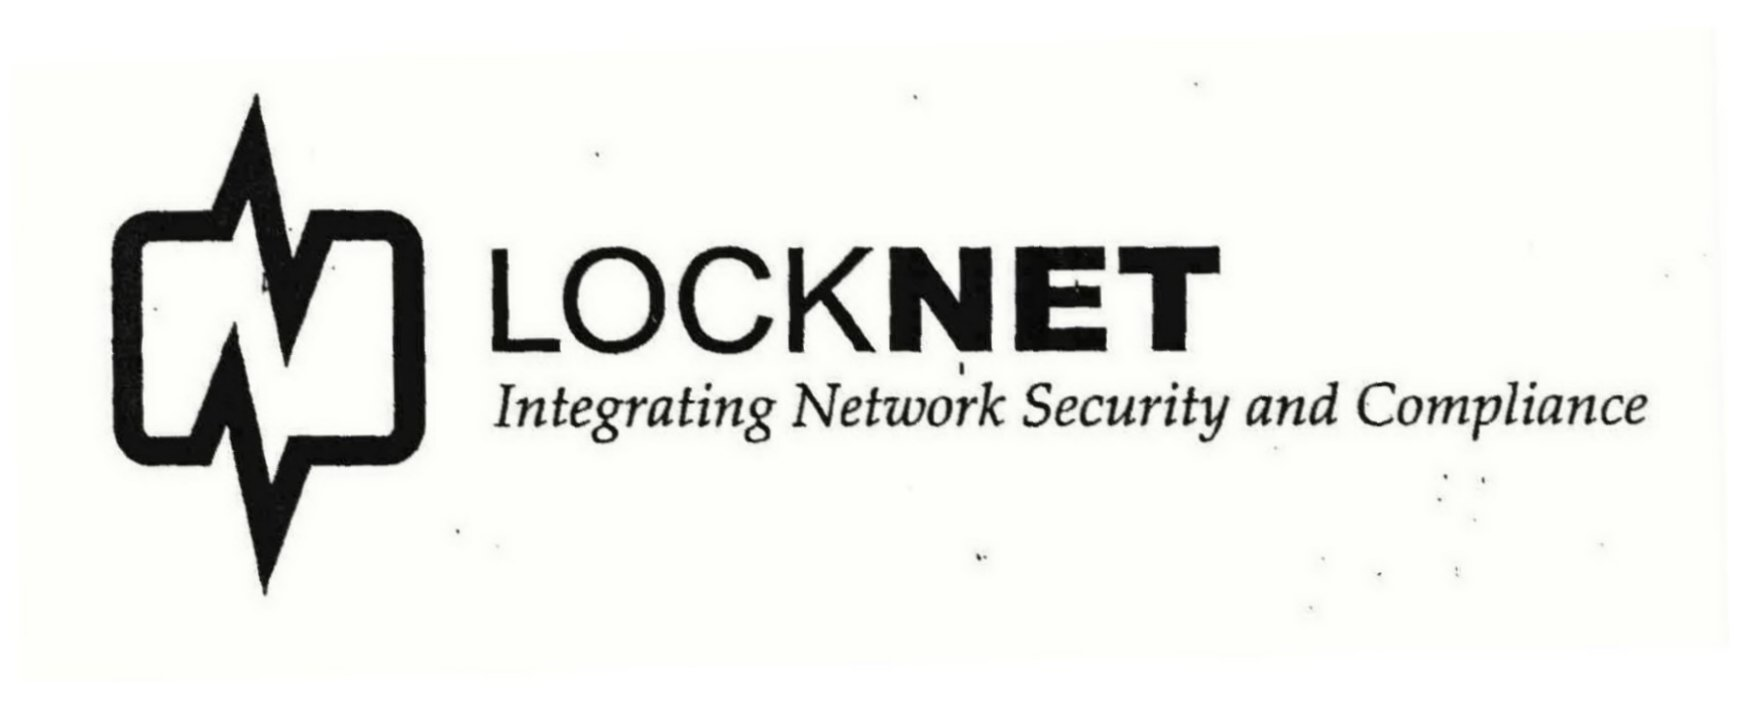  N LOCKNET INTEGRATING NETWORK SECURITY AND COMPLIANCE